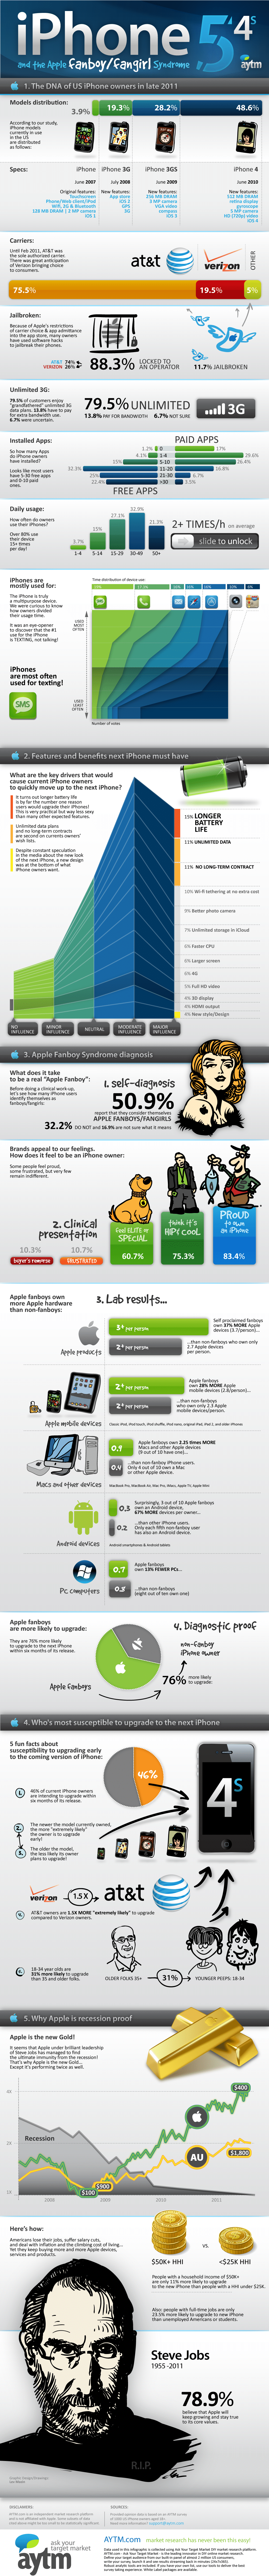 iPhone Fanboy Low Down Infographic